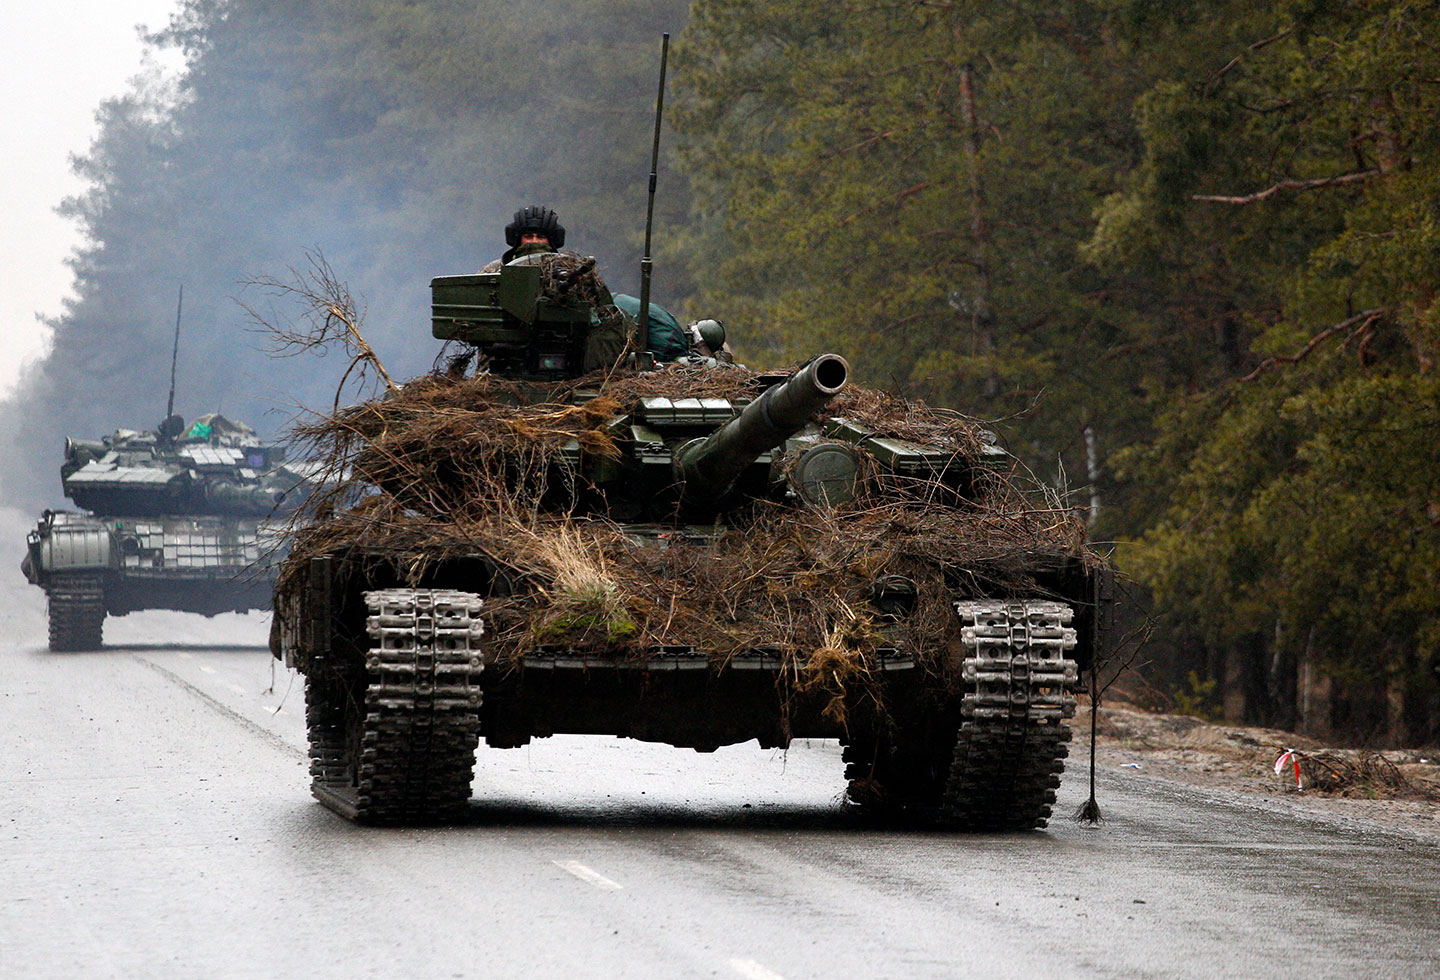 Anatol Lieven on How the Ukraine War Could End